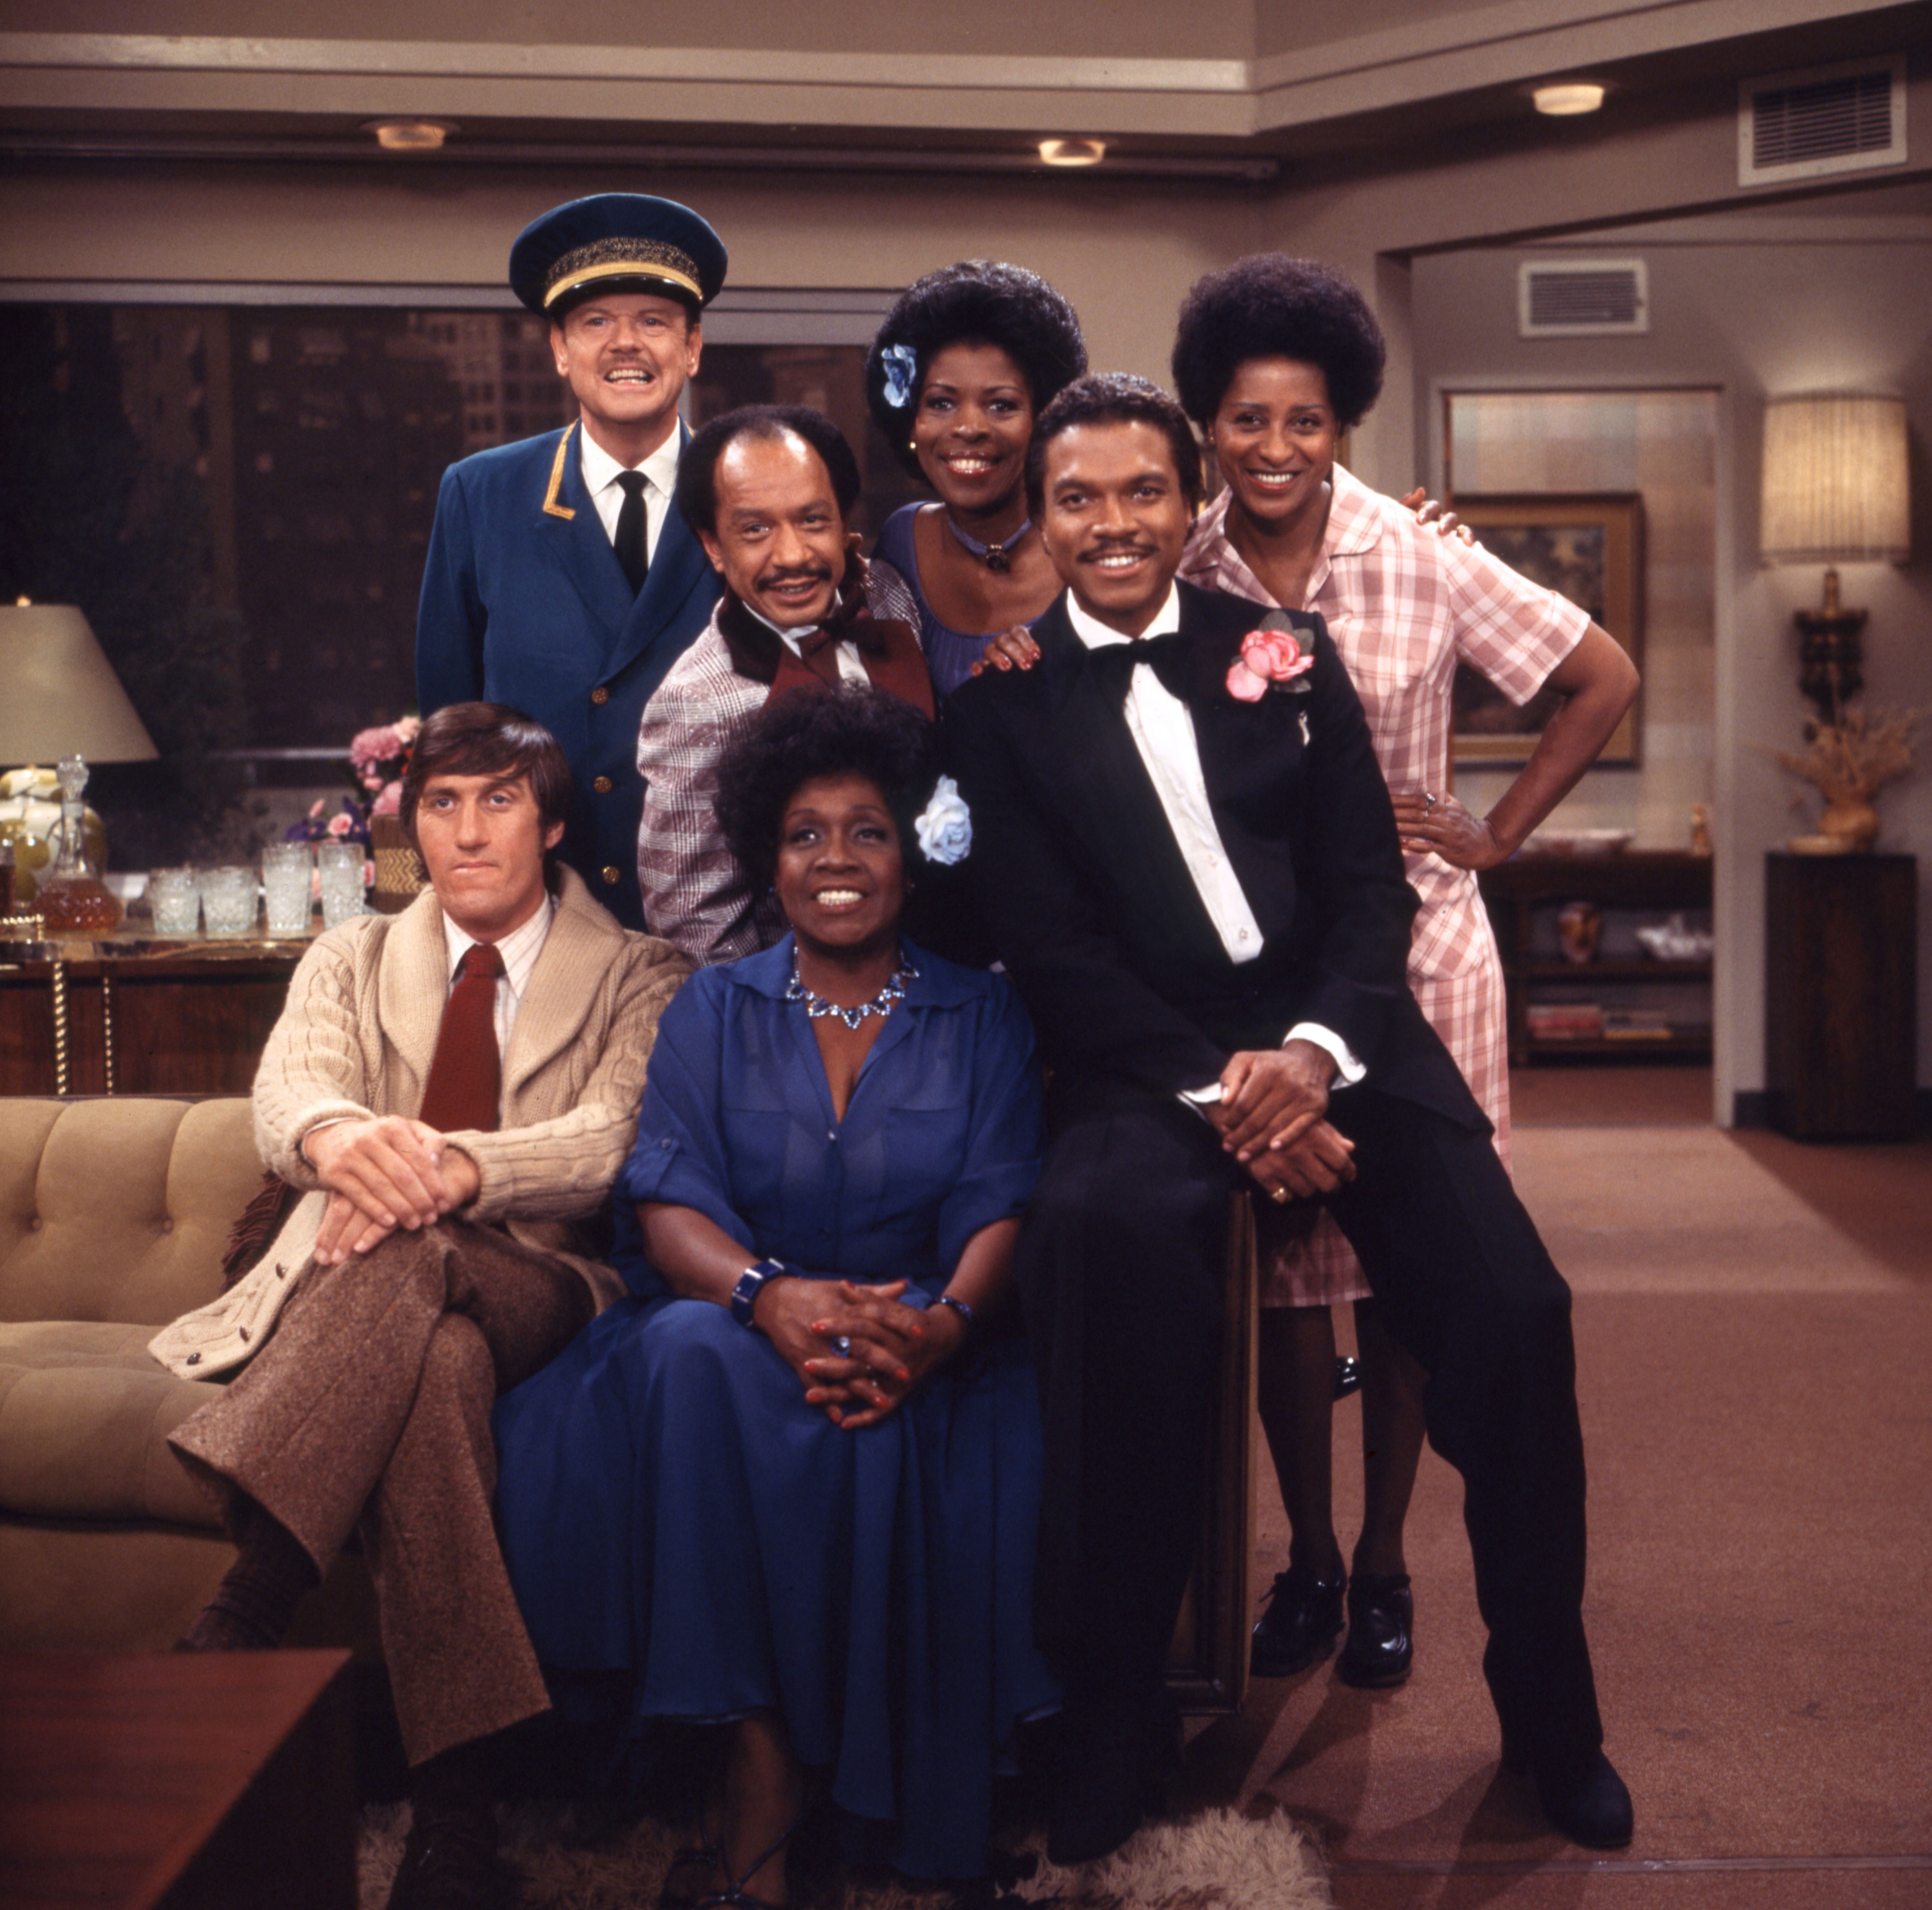 Ned Wertimer (as Ralph Hart), Sherman Hemsley (as George Jefferson), Roxie Roker (as Helen Willis), Marla Gibbs (as Florence Johnston), Paul Benedict (as Harry Bentley), Isabel Sanford (as Louise Jefferson) and guest star, Billy Dee Williams in "The Jeffersons" | Photo: CBS via Getty Images